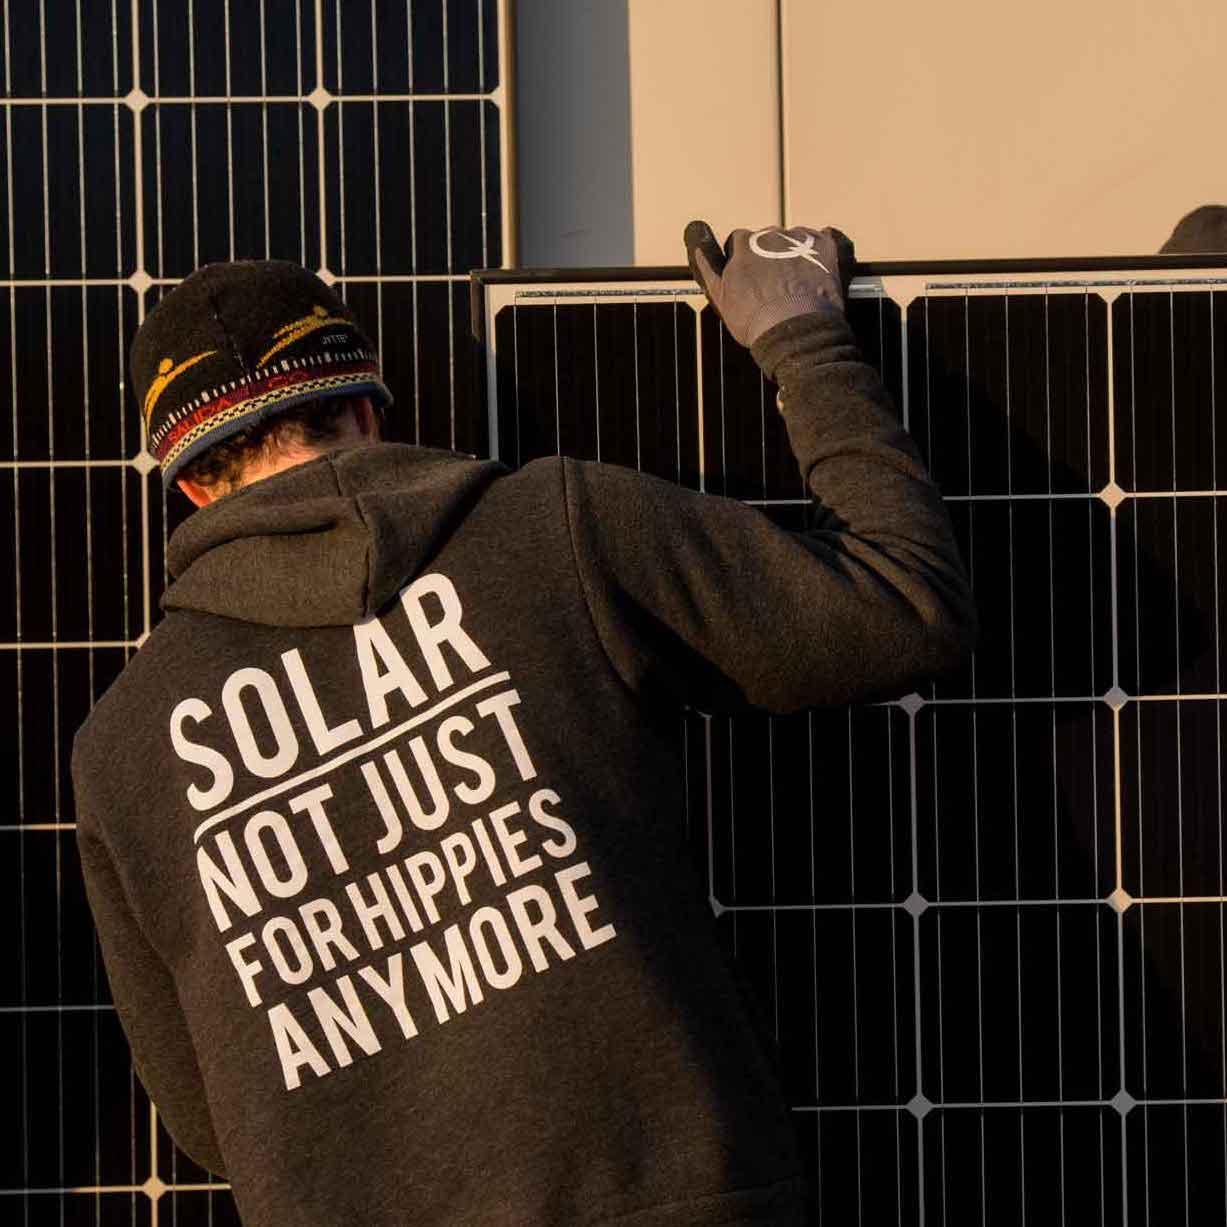 man installing solar panel with a hoodie that says "Solar, not just for hippies anymore" printed on the back.